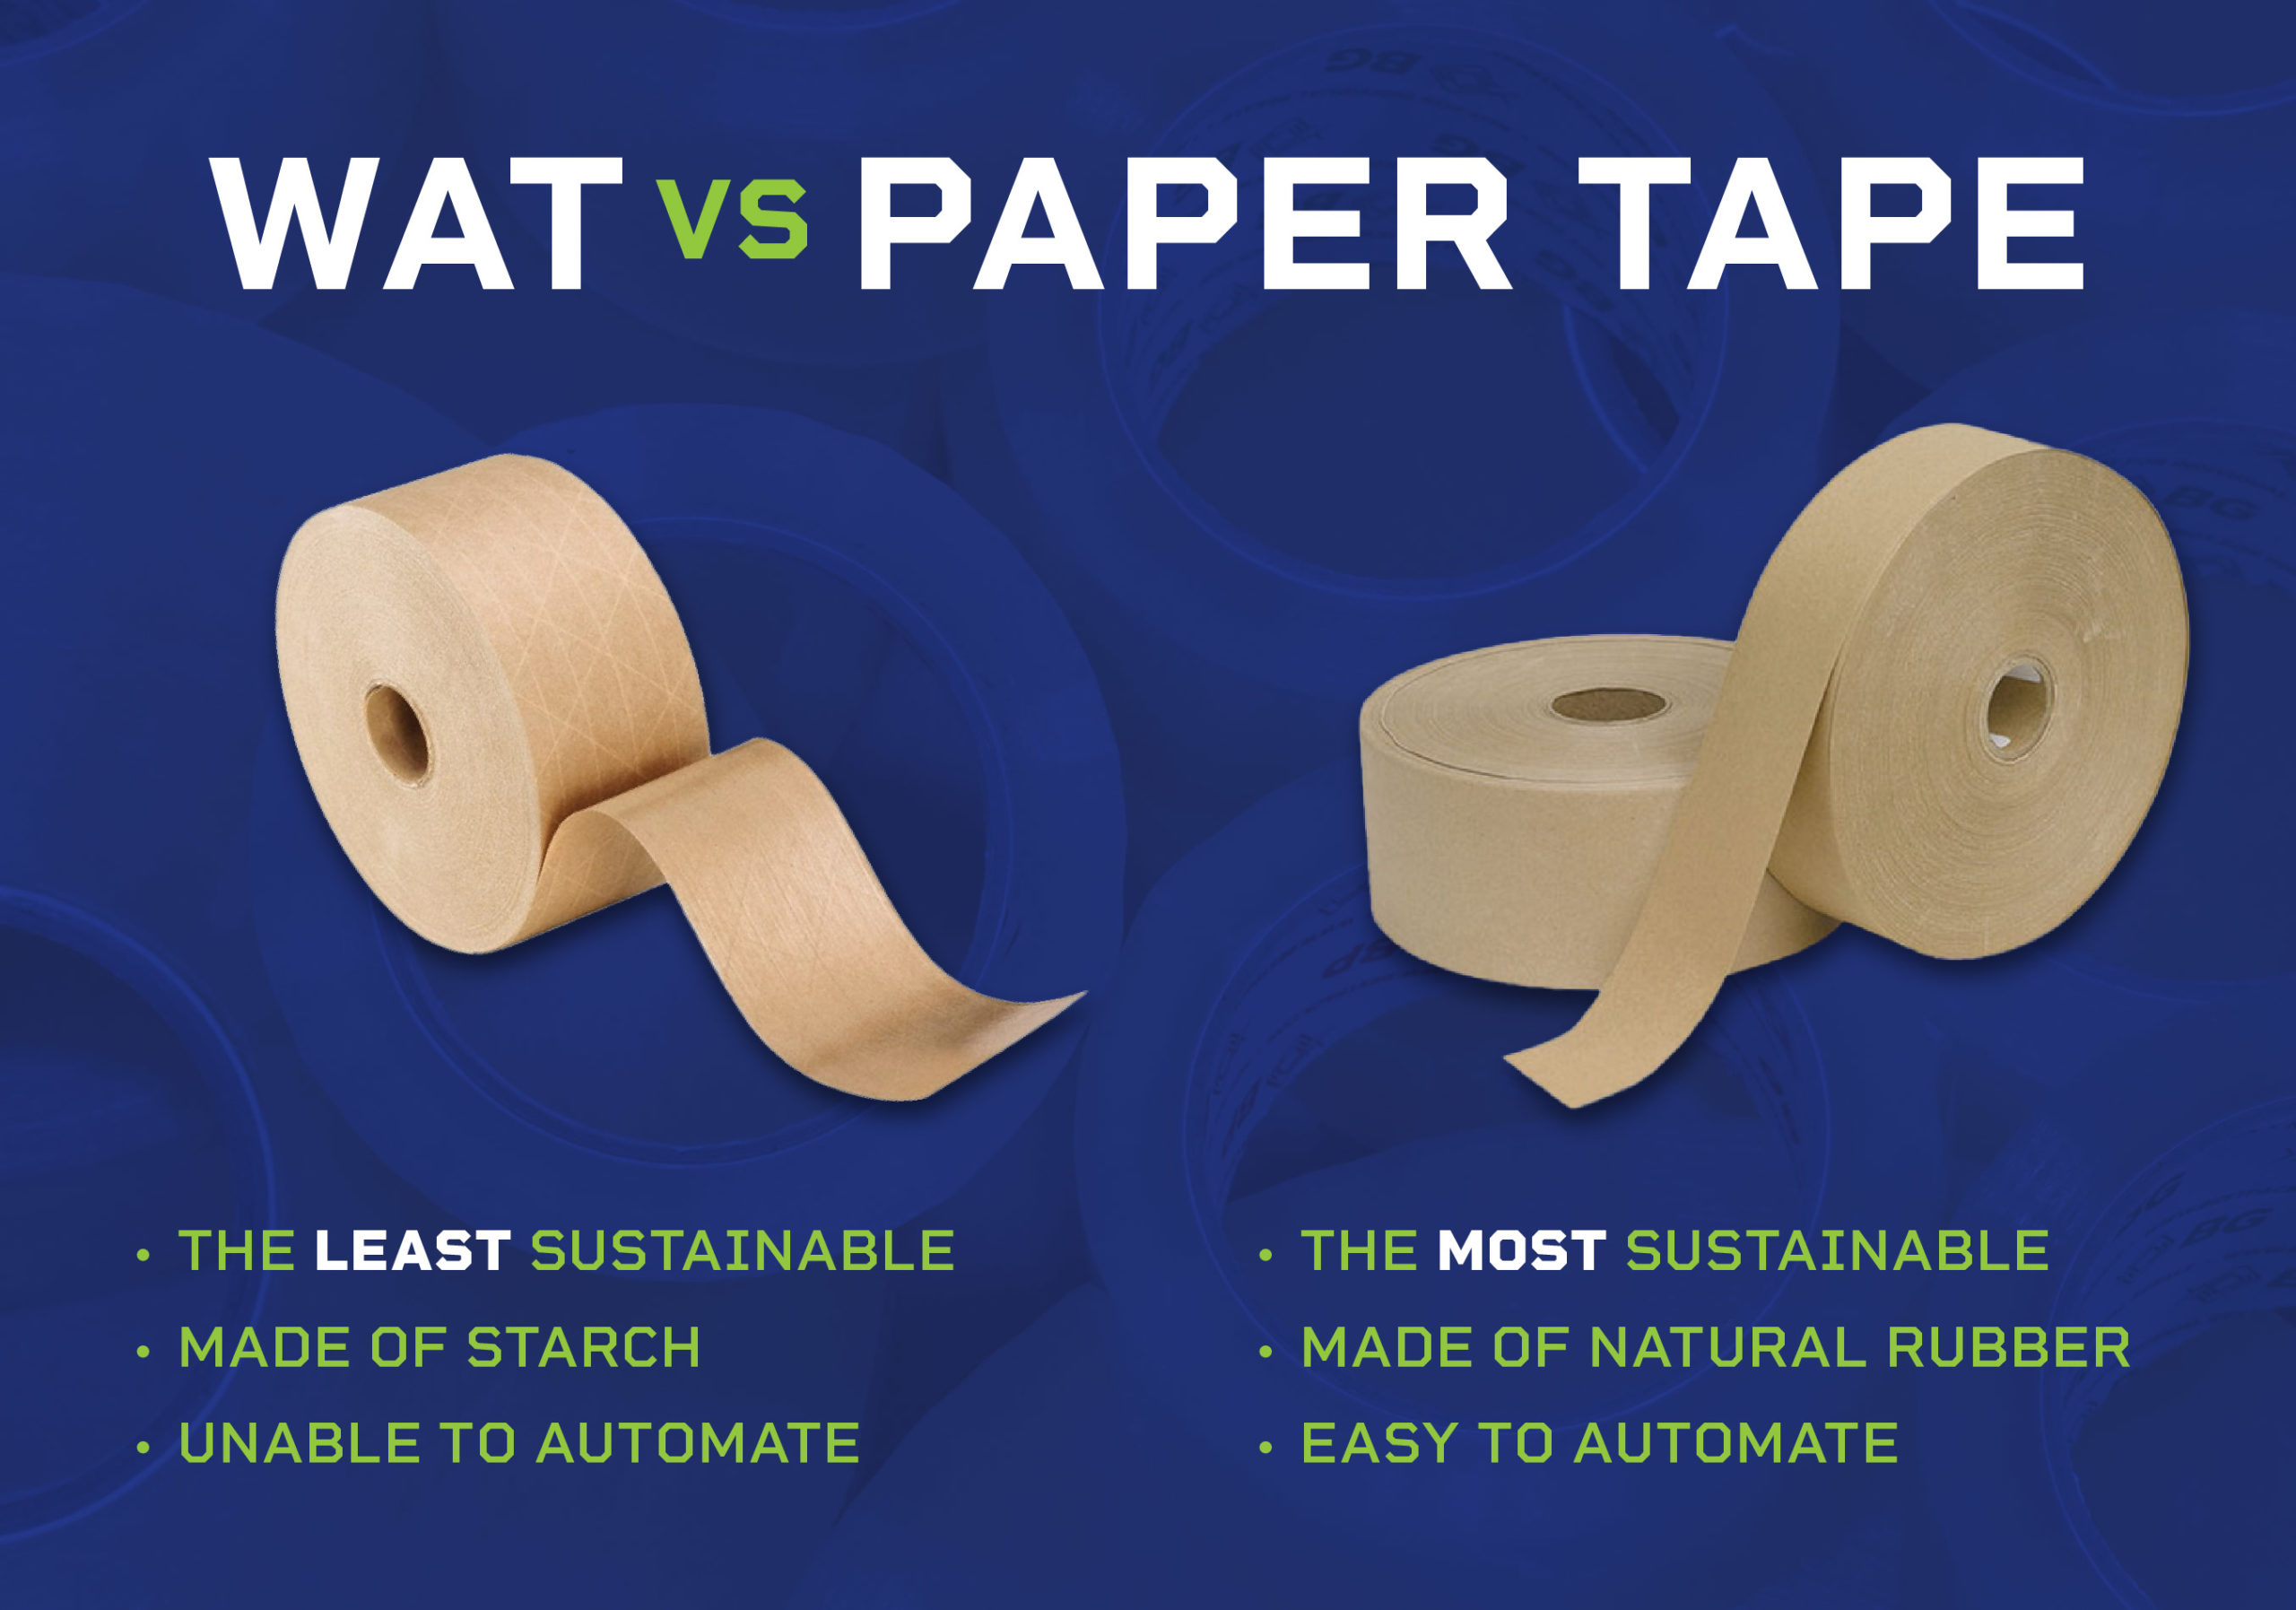 Paper tape: the most sustainable